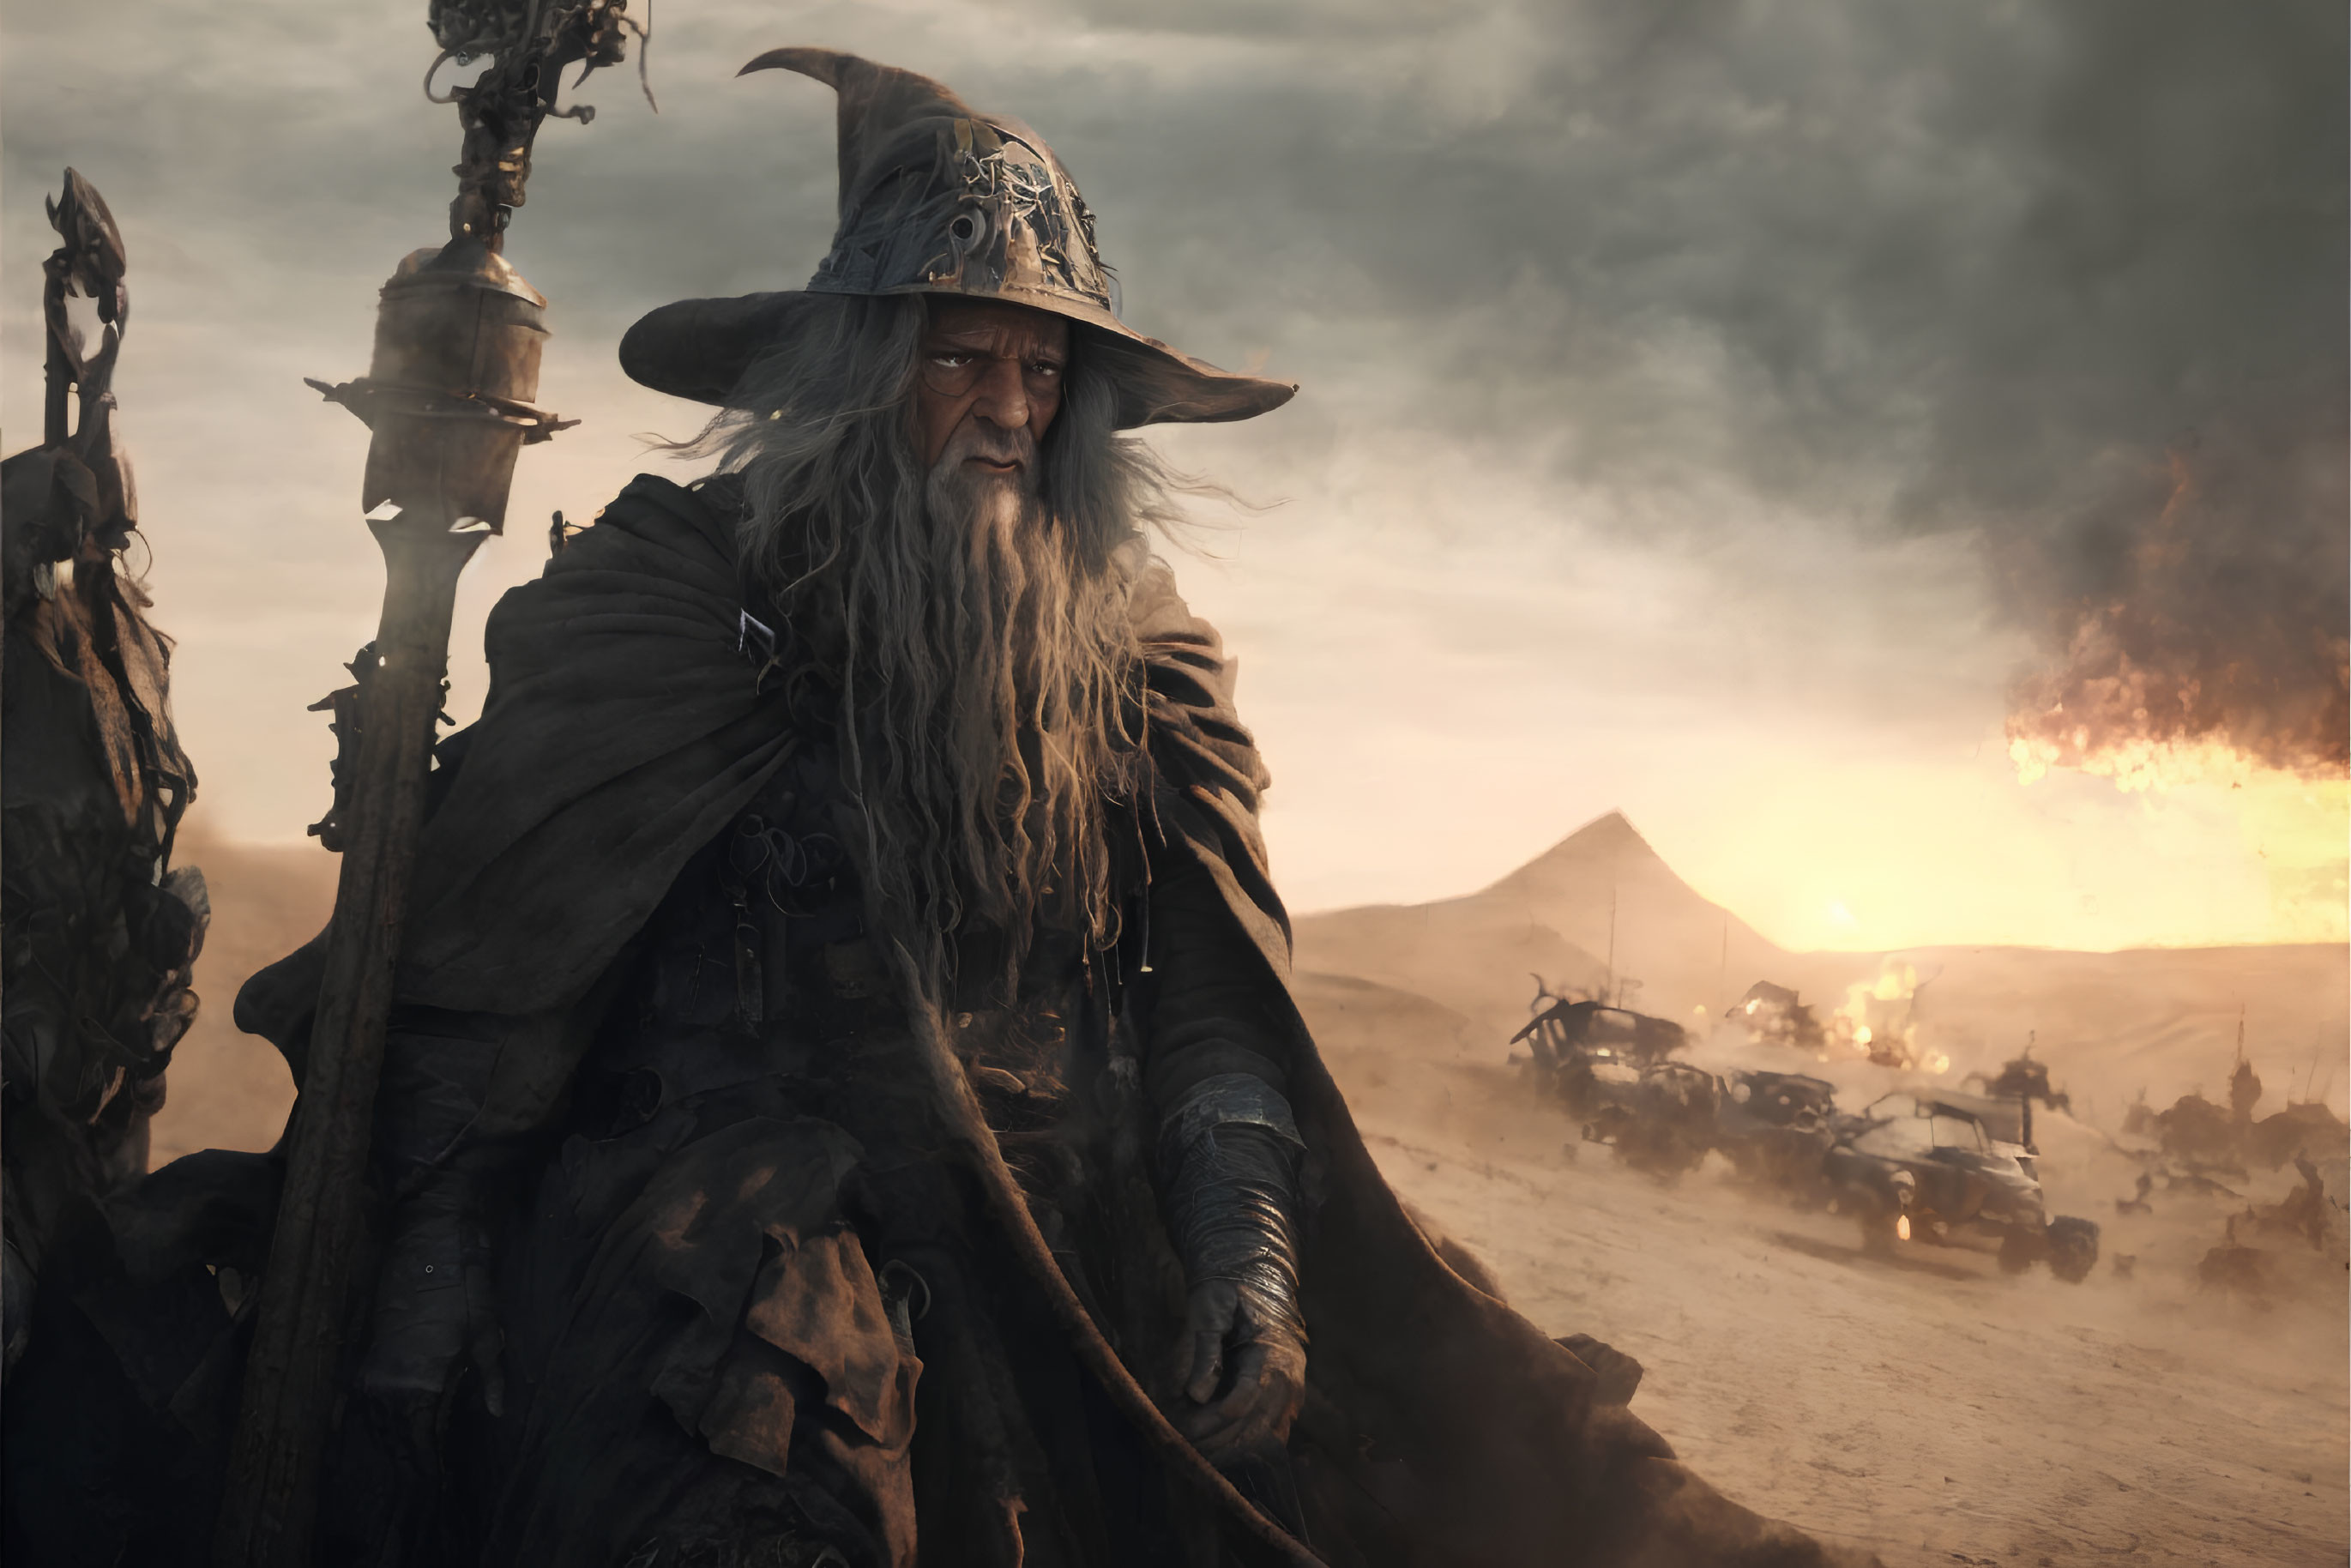 Wizard with long beard in desert with burning structure and war machines.